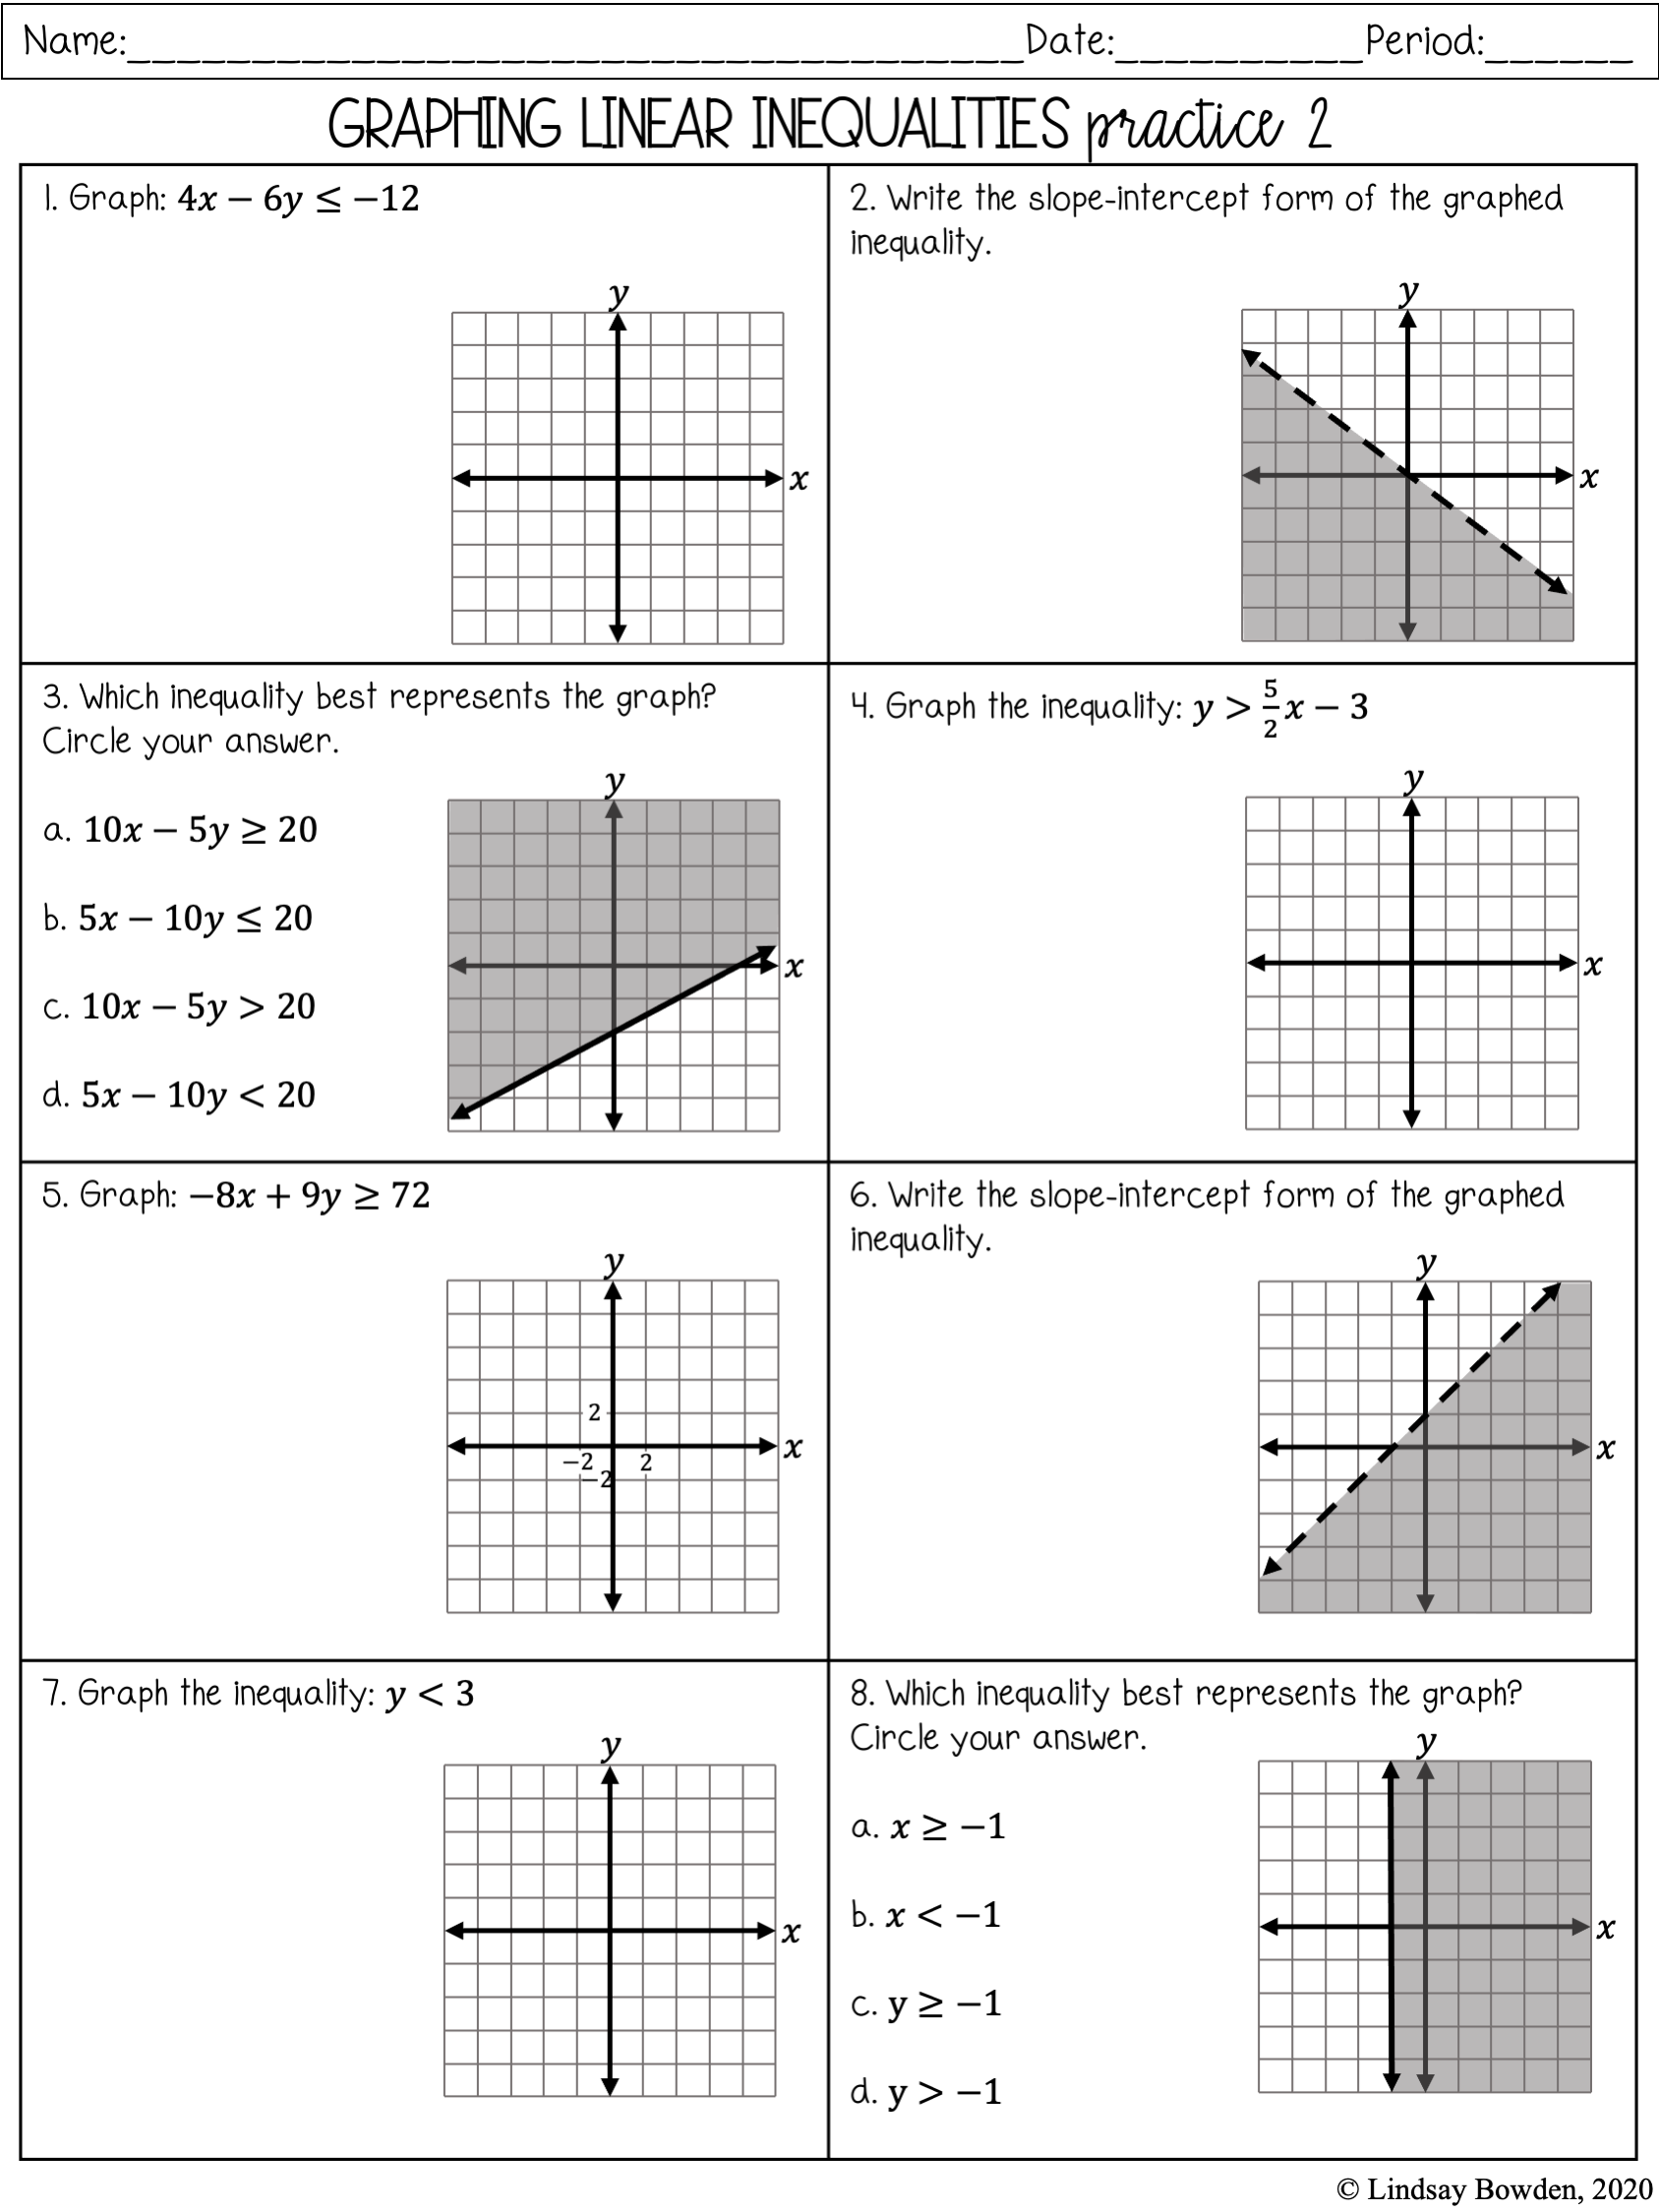 Linear Inequalities Notes And Worksheets Lindsay Bowden